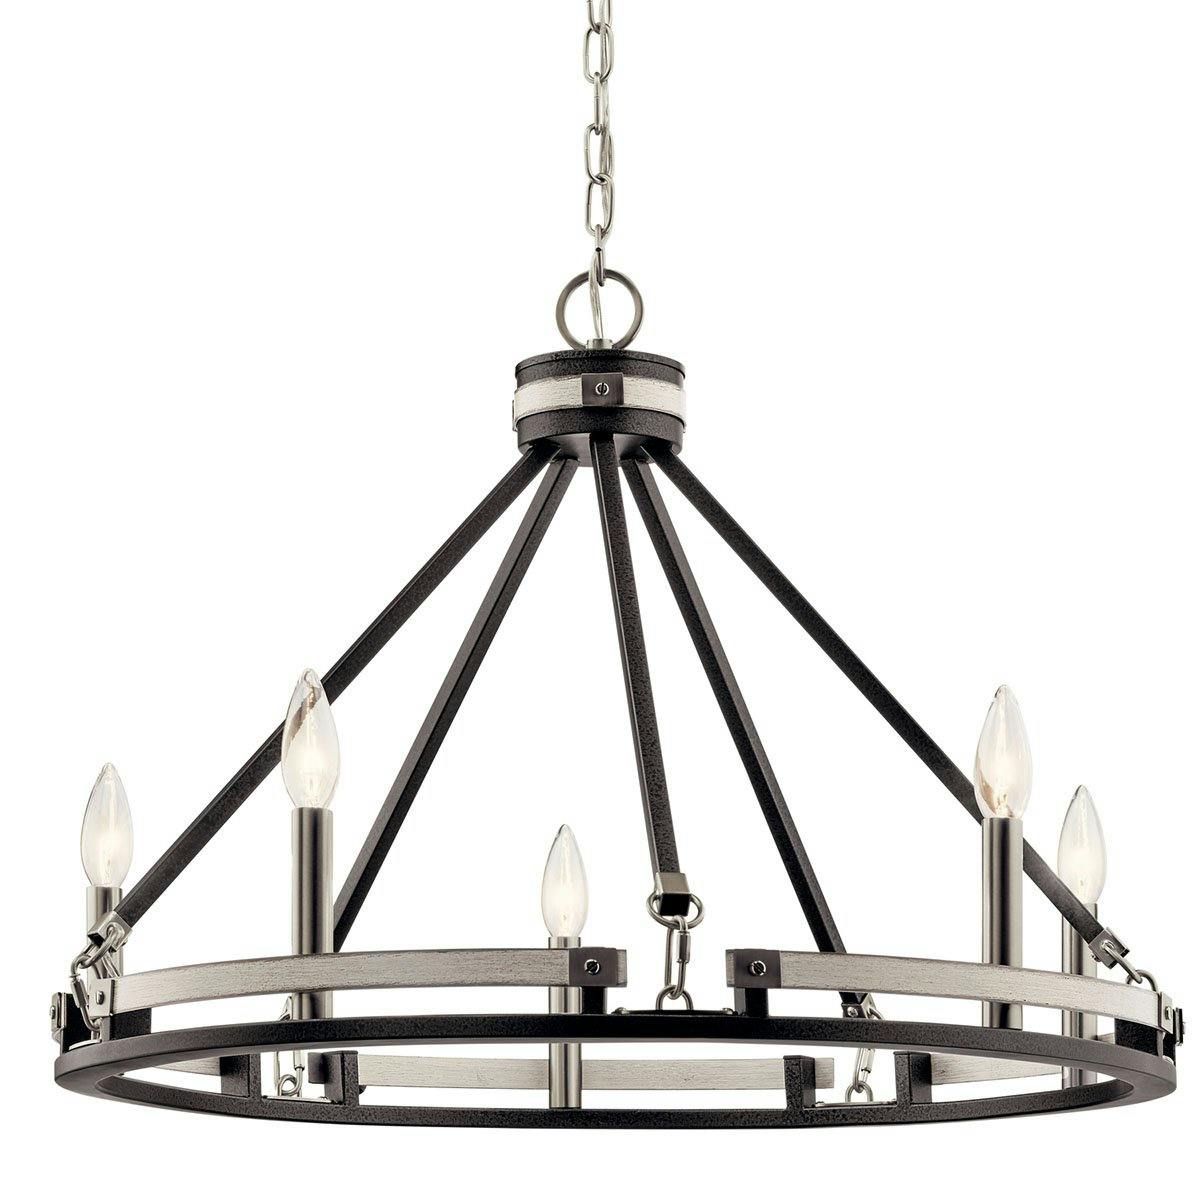 Stetton™ 18" Chandelier Anvil Iron without the canopy on a white background